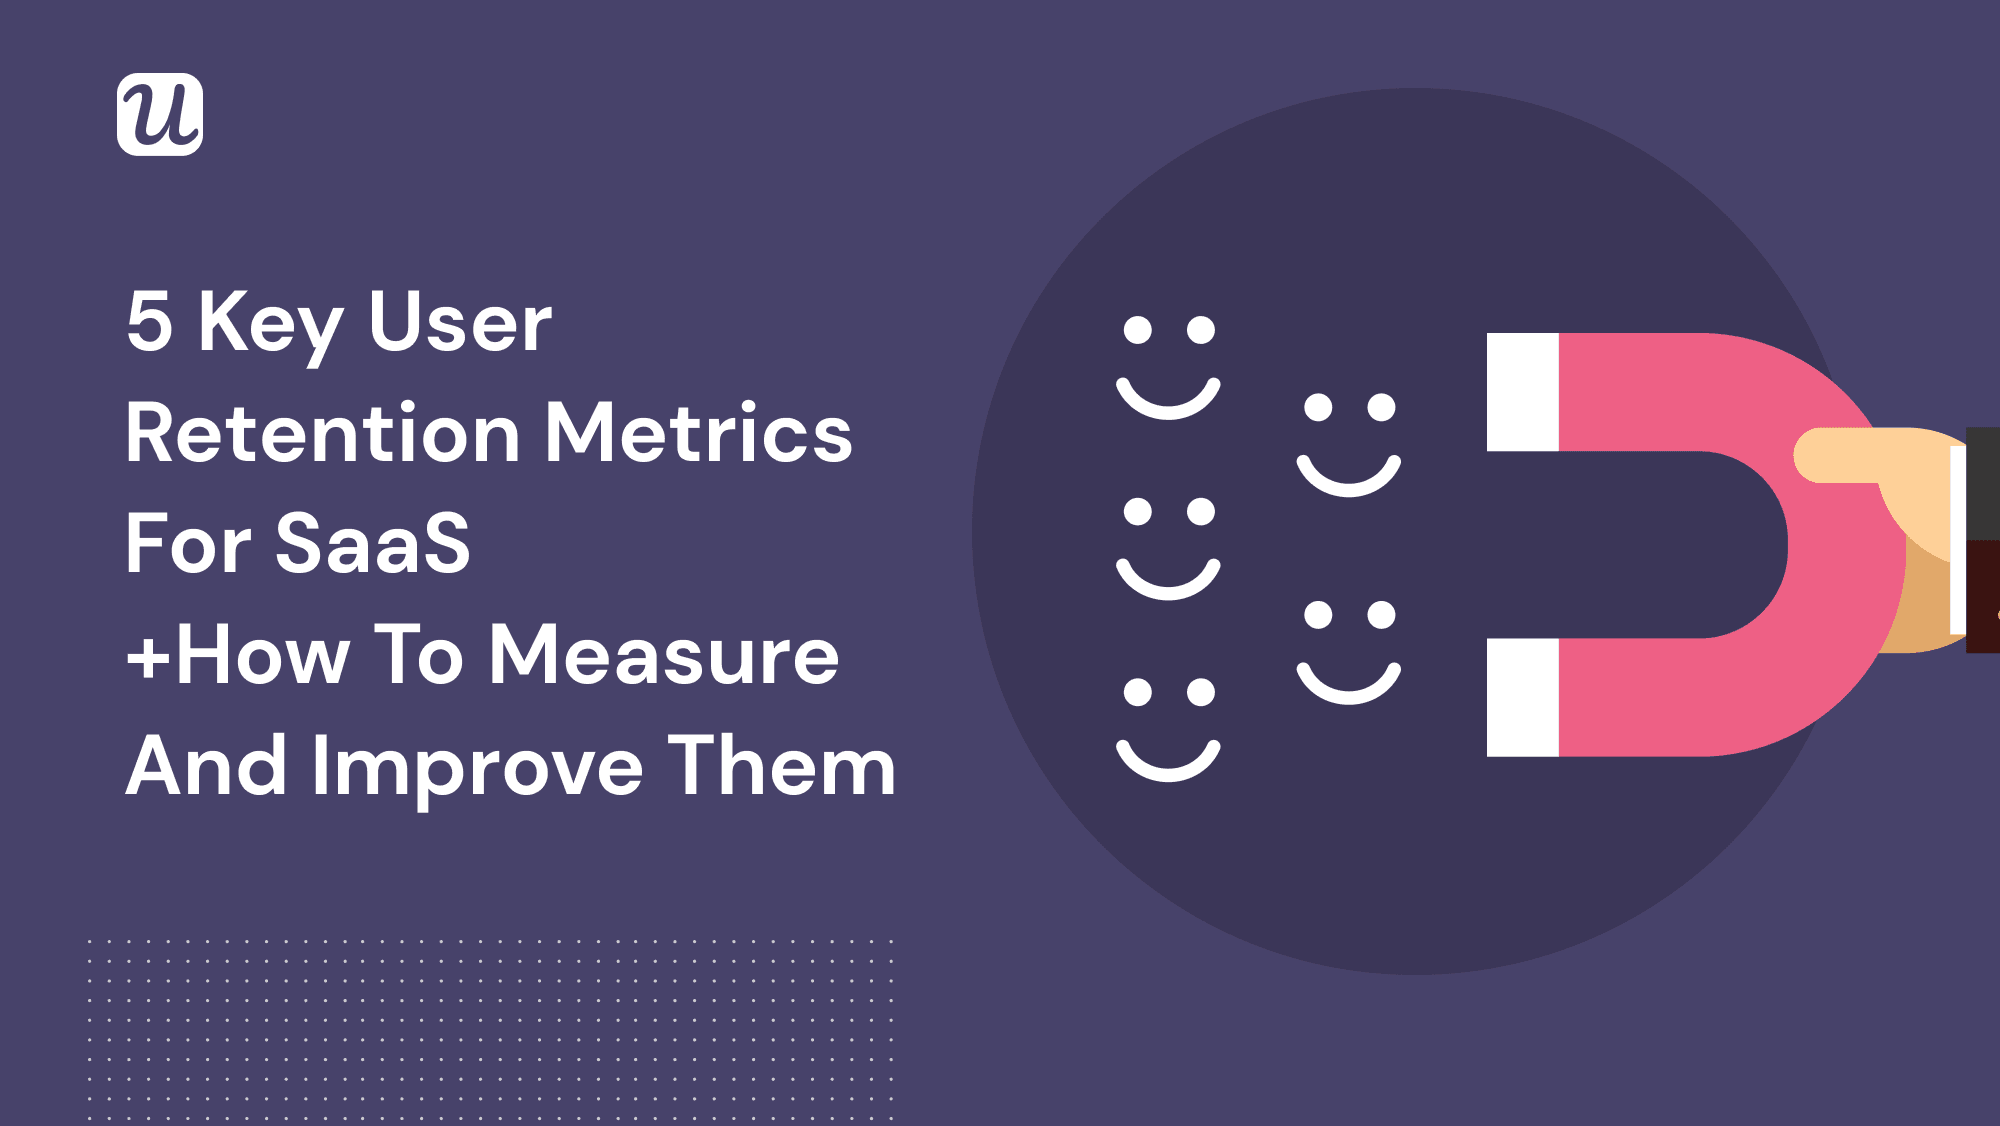 5 Key User Retention Metrics for SaaS [+ How to Measure and Improve Them]